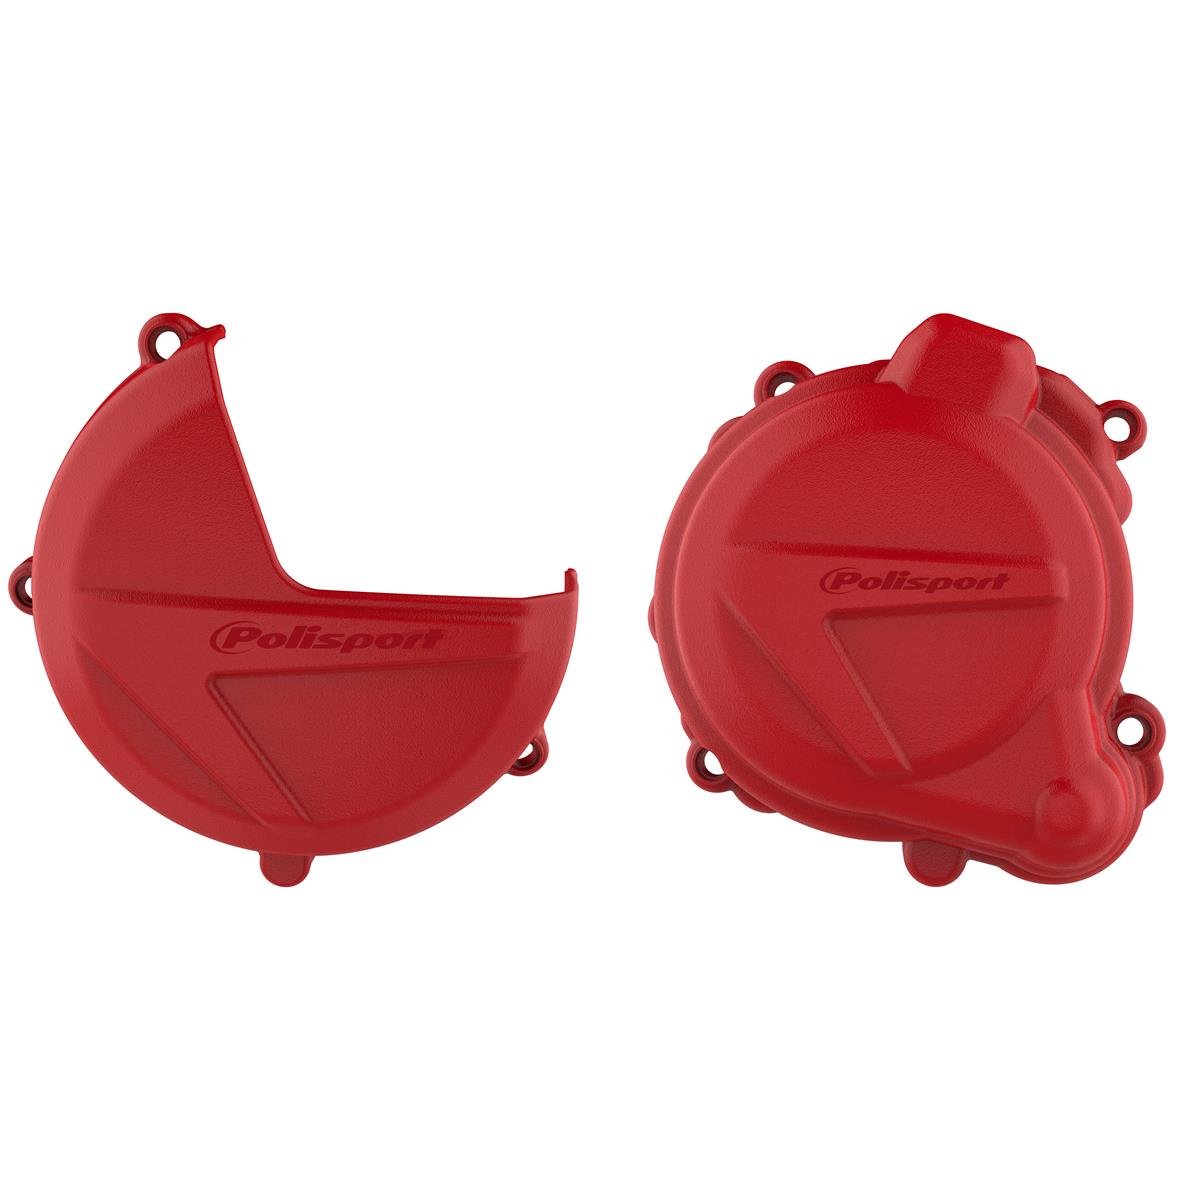 Polisport Clutch/Ignition Cover Protection  Beta RR 250/300 2T 13-17, Xtrainer 16-17, Red